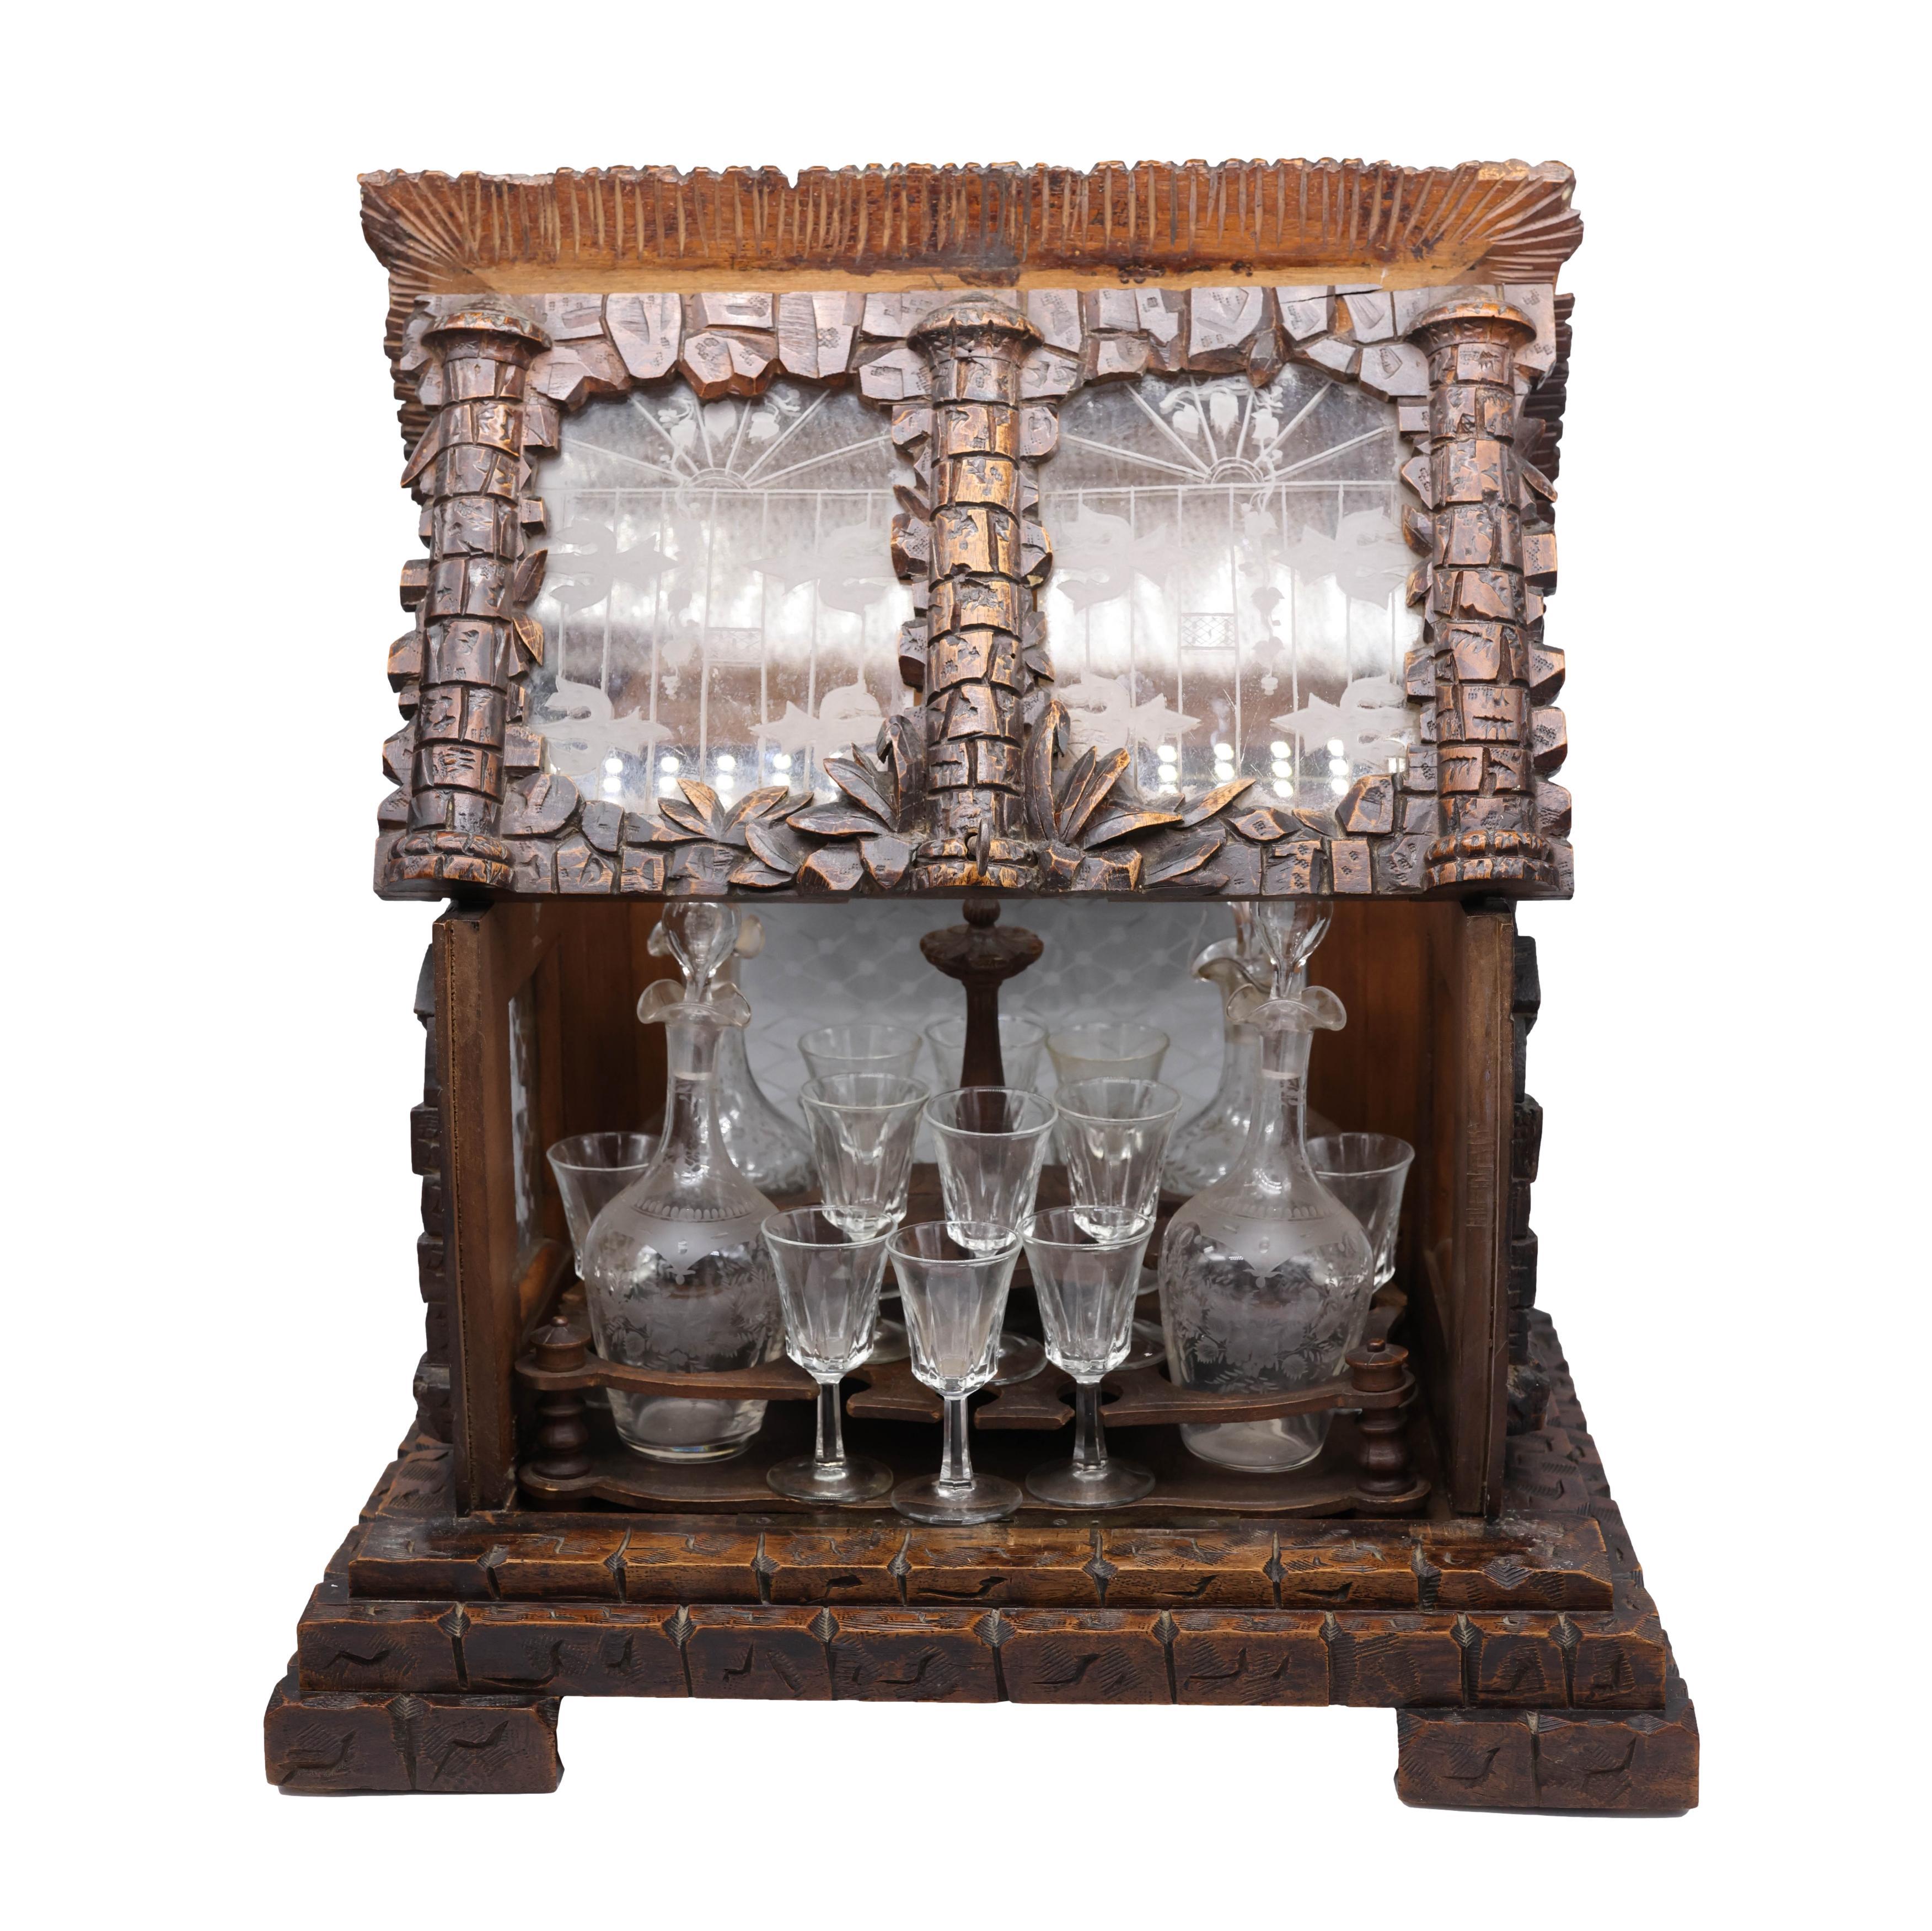 Exceptional black forest Tantalus set, the box hand-carved in the form of a house with individually carved stones, etched glass leaded windows, and thatched roof, surmounted by a carved hunting dog, with hinged front and top, the fitted interior